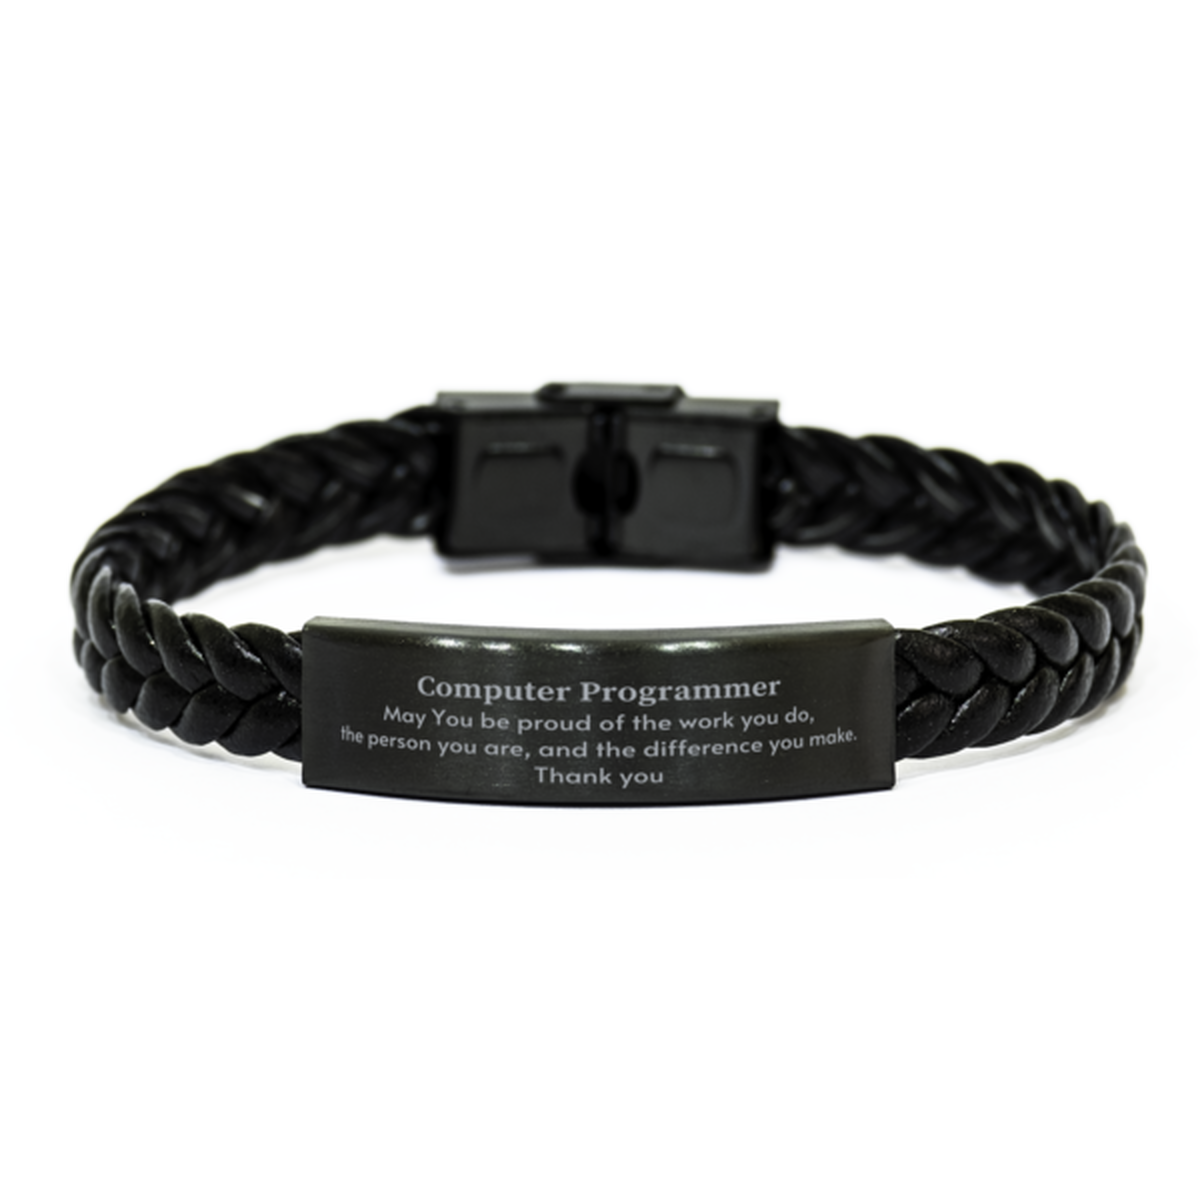 Heartwarming Braided Leather Bracelet Retirement Coworkers Gifts for Computer Programmer, Computer Programmer May You be proud of the work you do, the person you are Gifts for Boss Men Women Friends